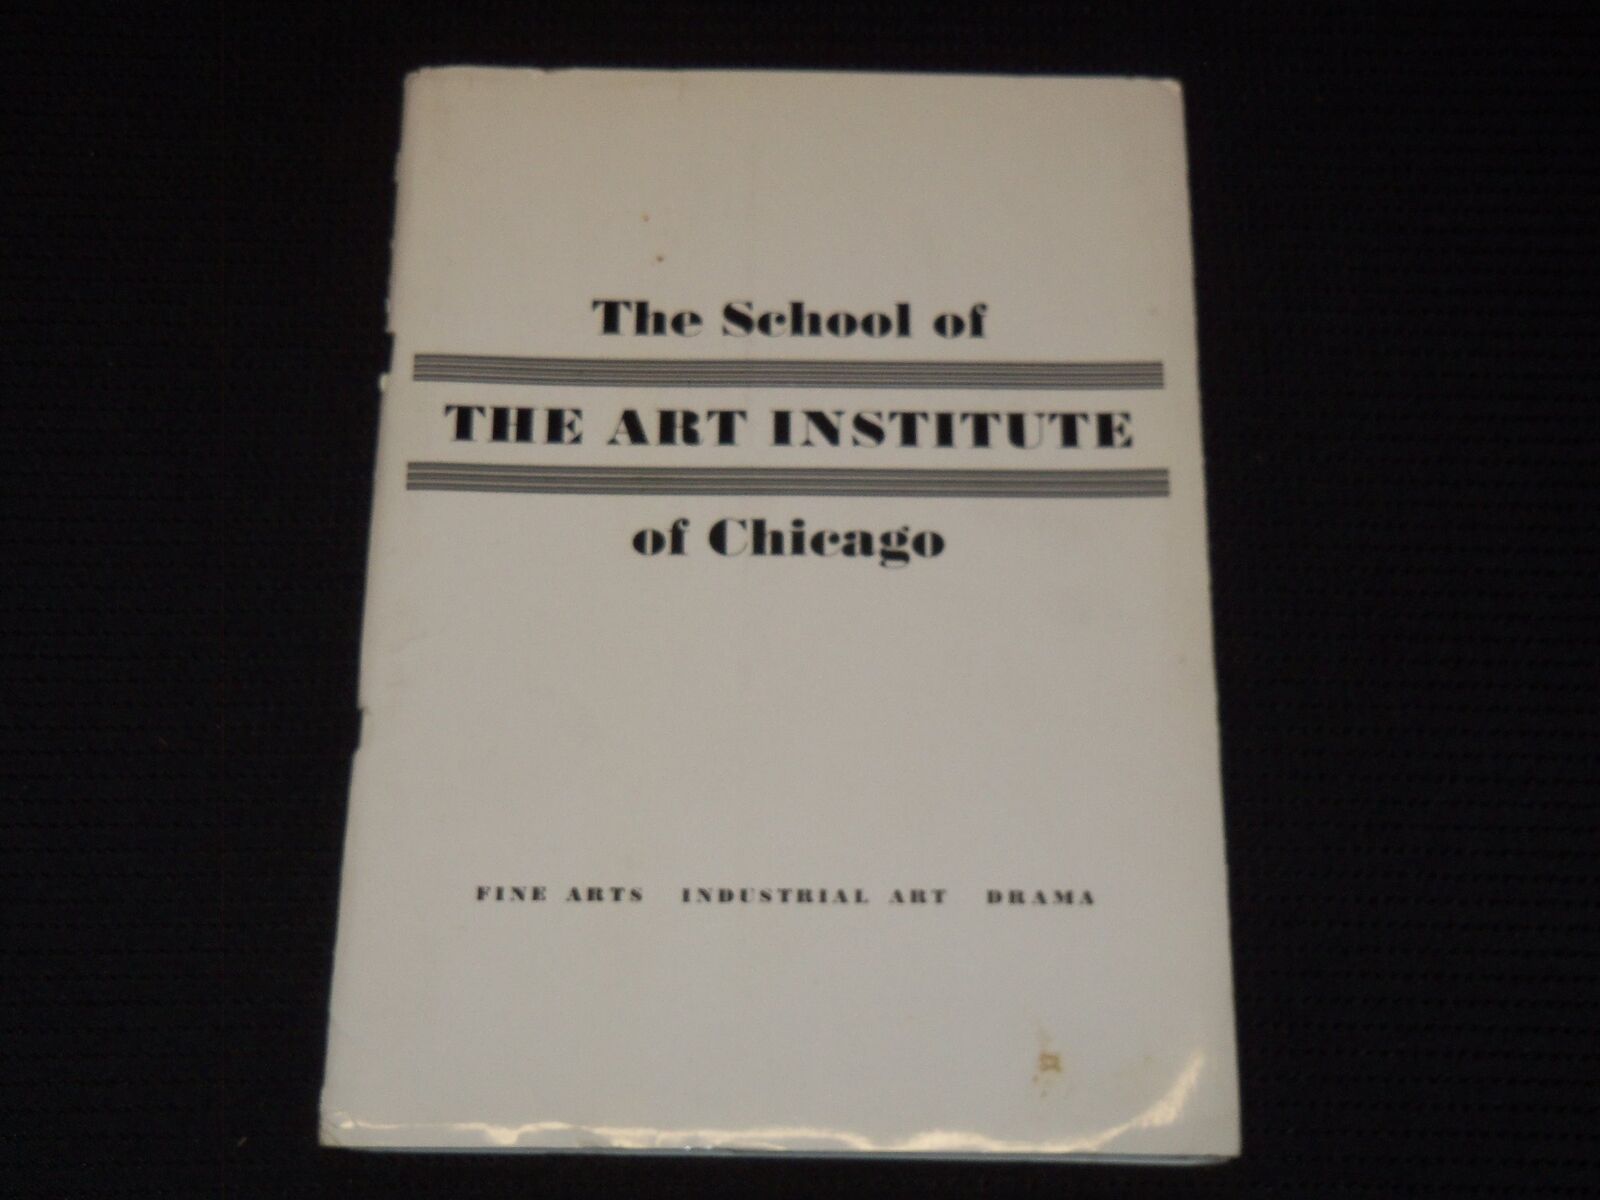 1945 THE SCHOOL OF THE ART INSTITUTE OF CHICAGO BOOK - J 7971